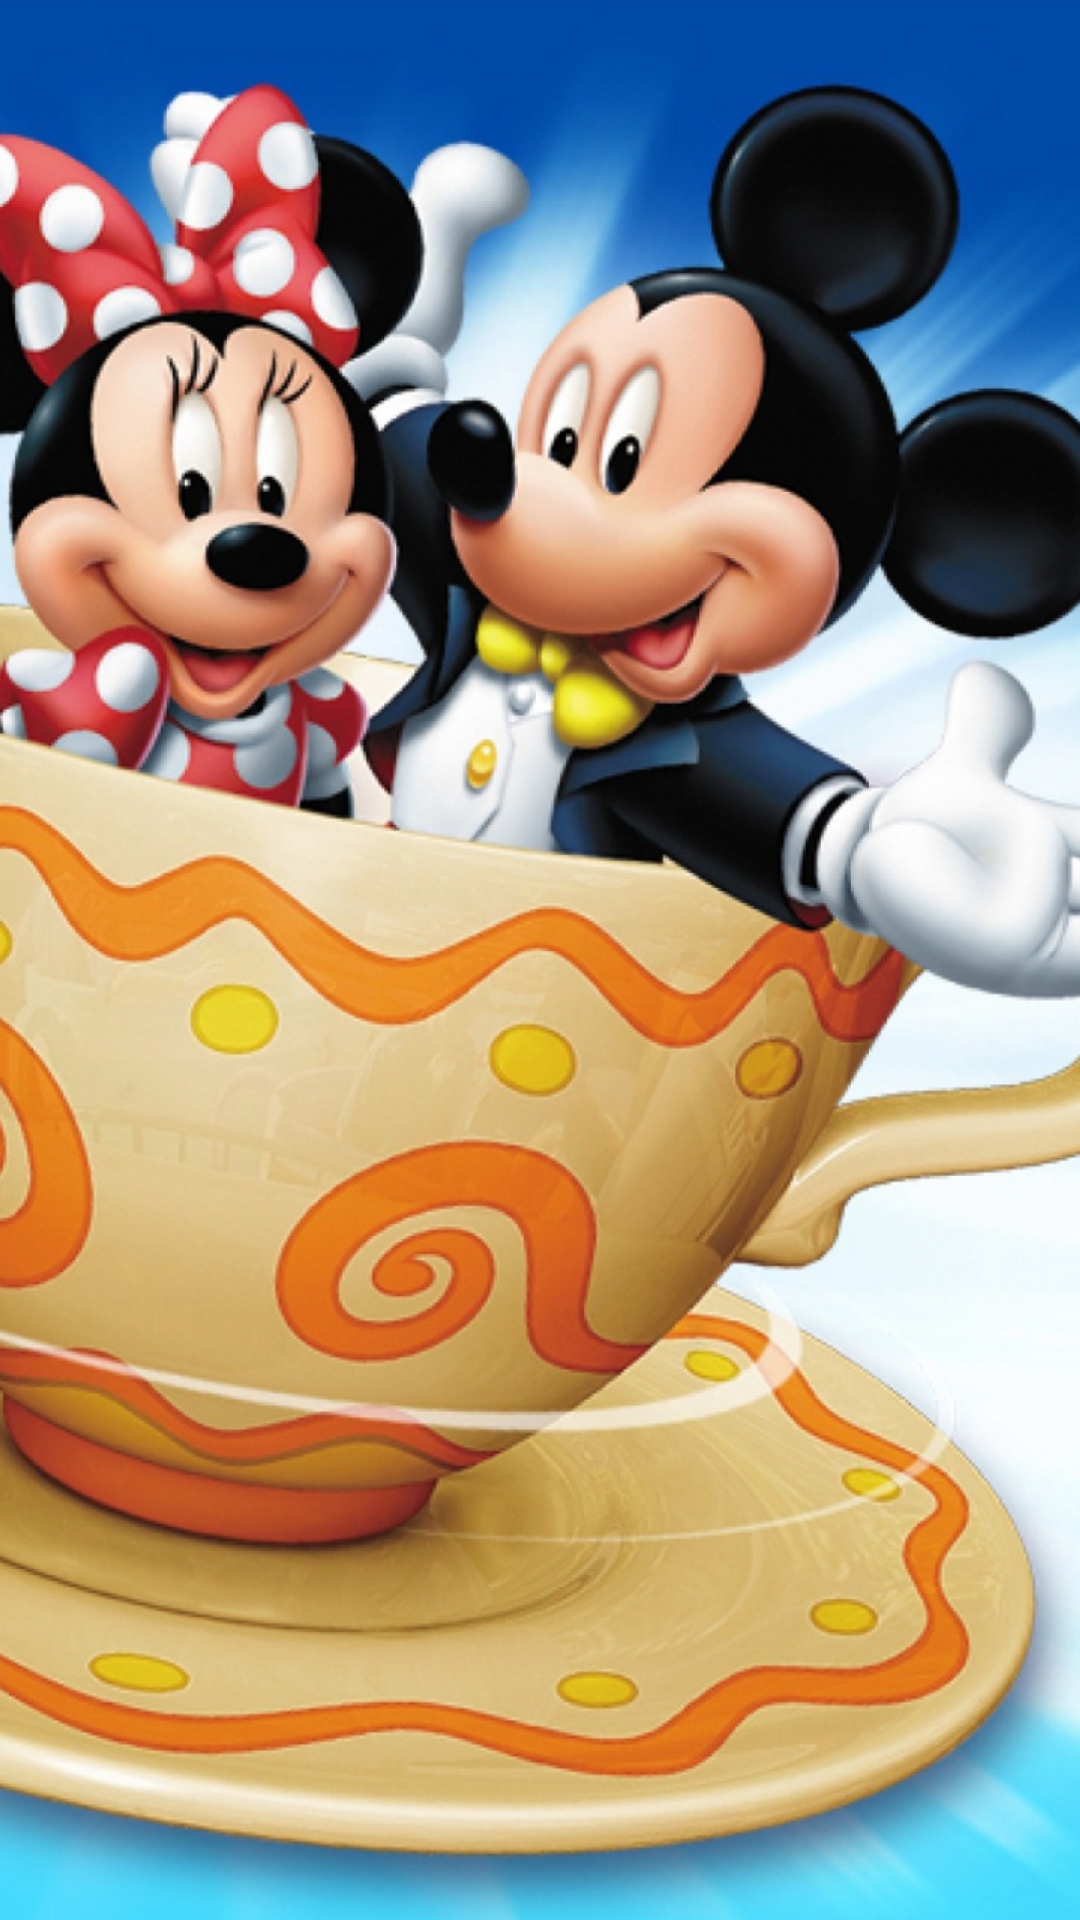 Das Mickey And Minnie Mouse In Cup Wallpaper 1080x1920